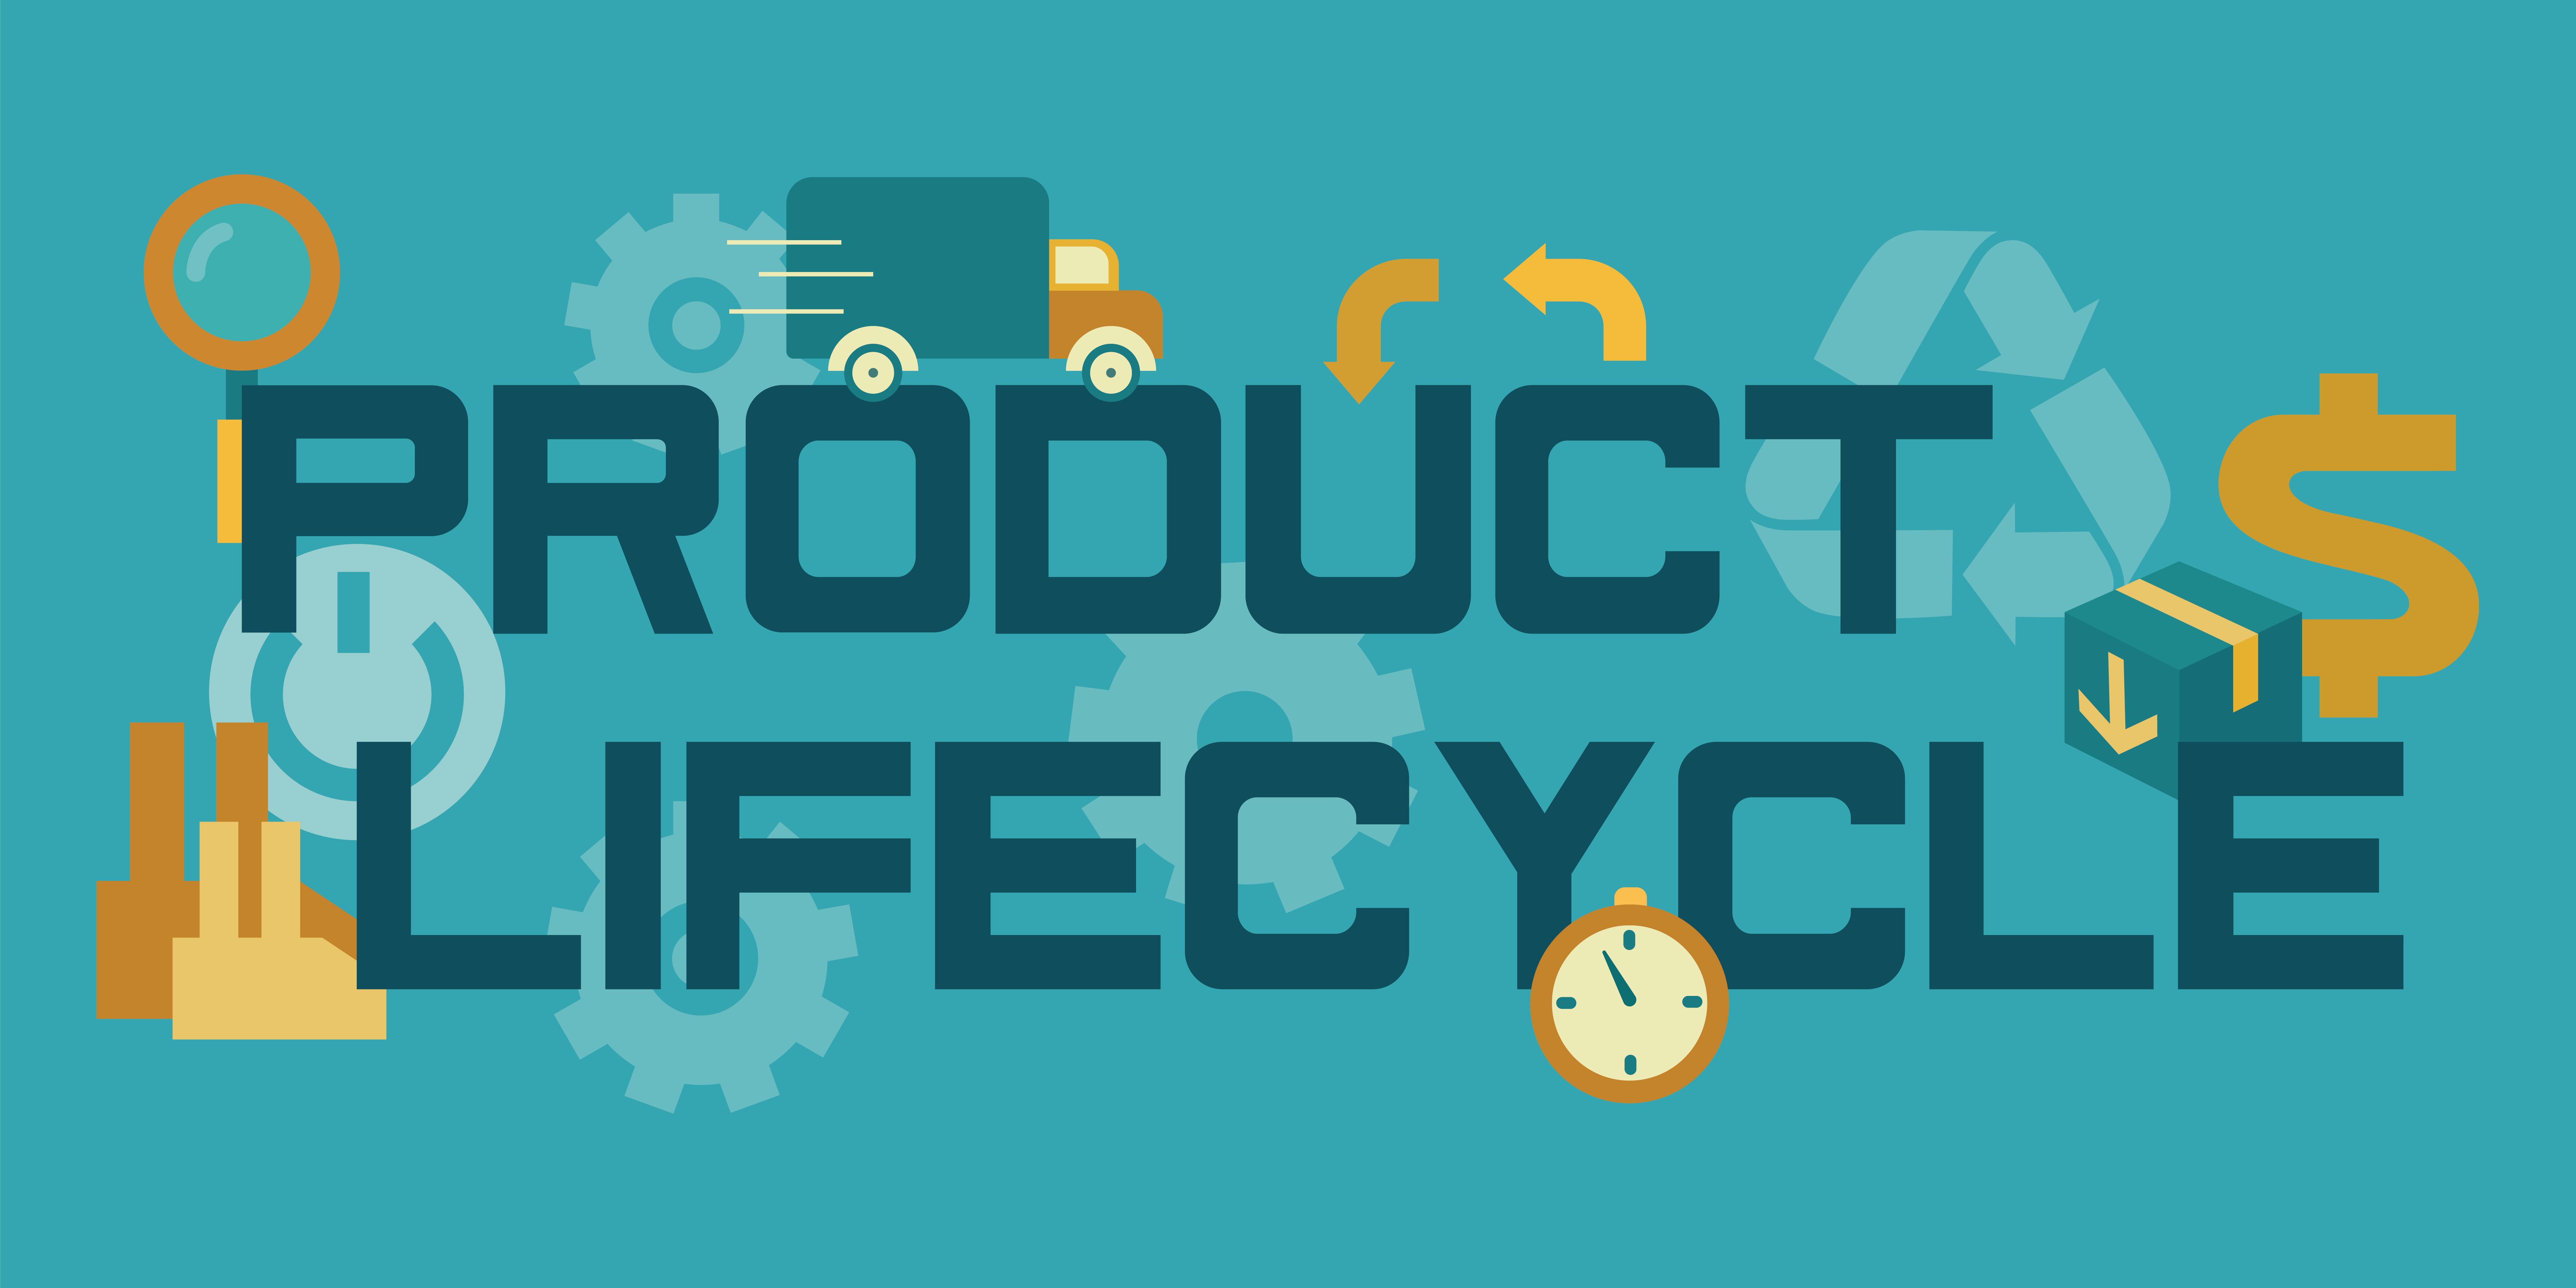 Product Lifecycle